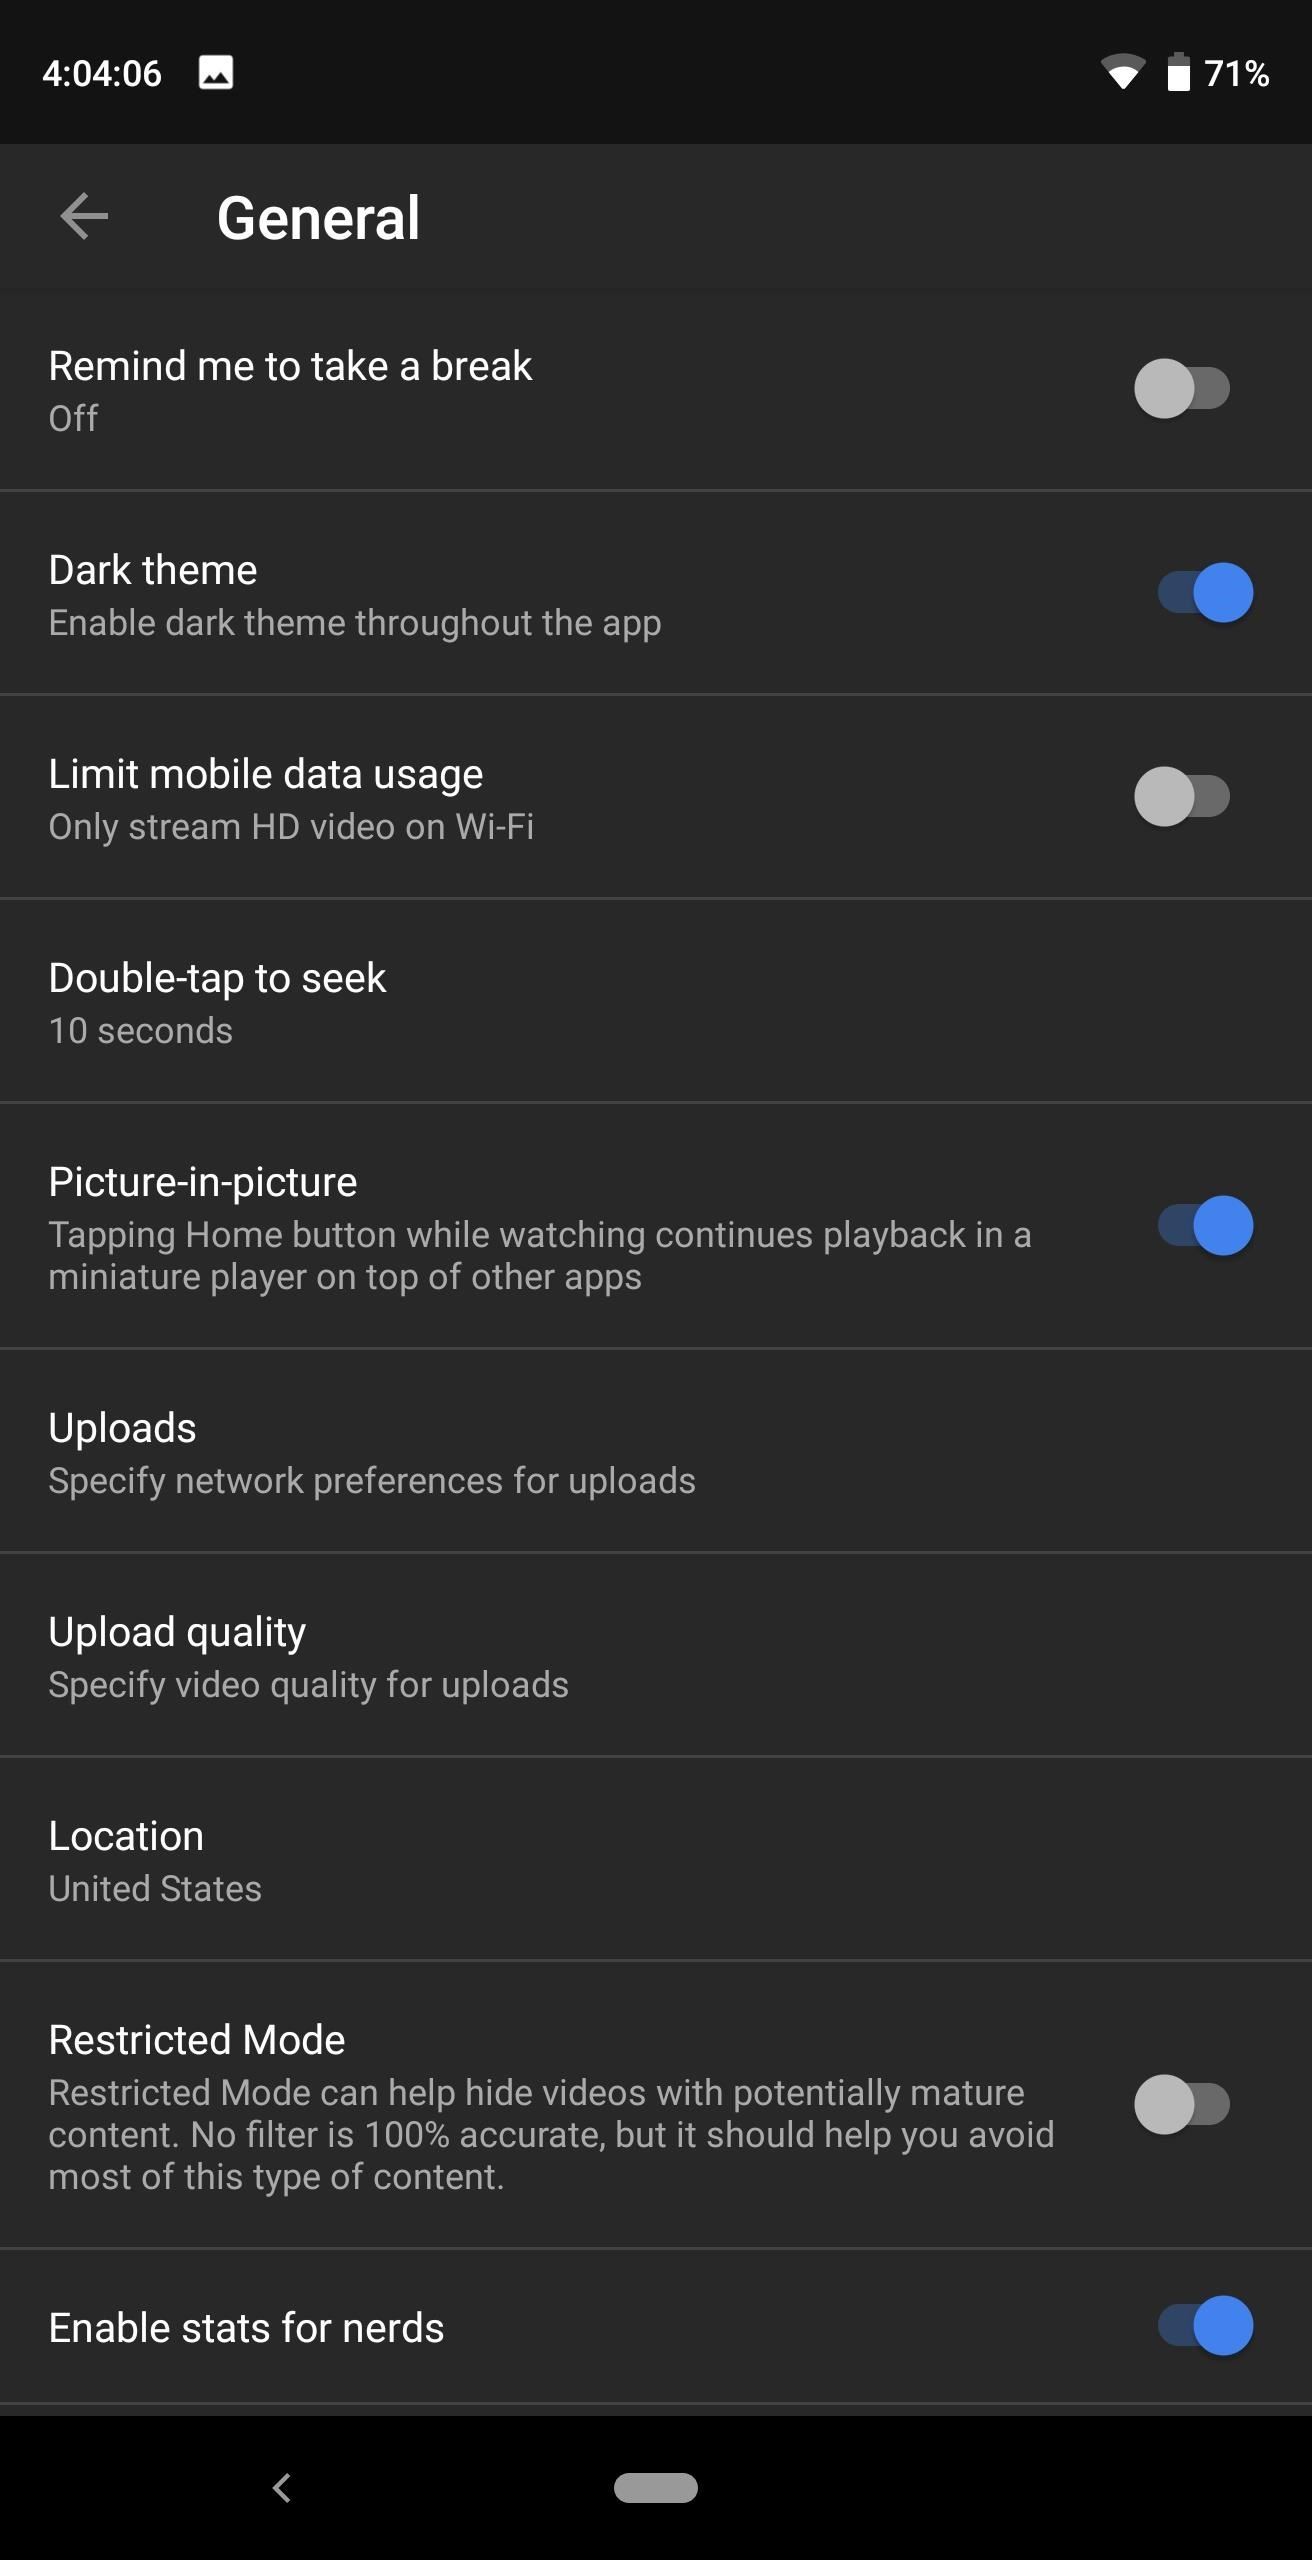 YouTube Finally Has a Dark Theme on Android — Here's How to Get It